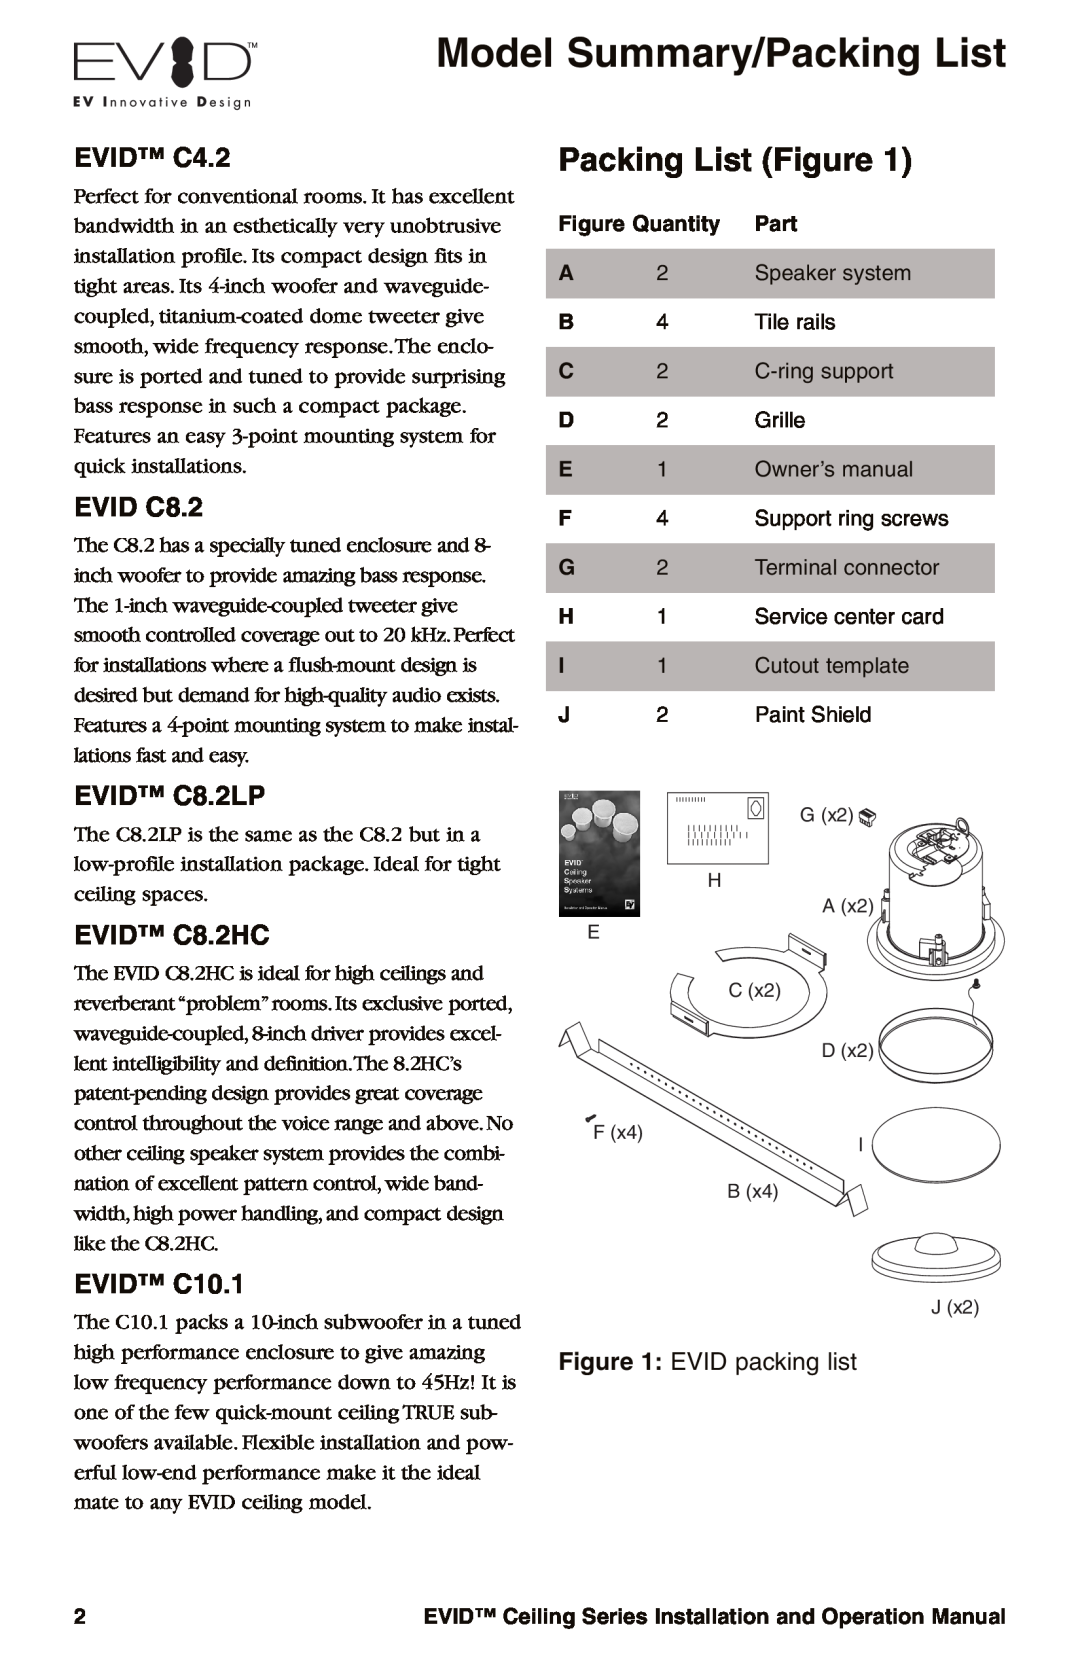 Electro-Voice Model Summary/Packing List, Packing List Figure, EVID C4.2, EVID C8.2LP, EVID C8.2HC, EVID C10.1 